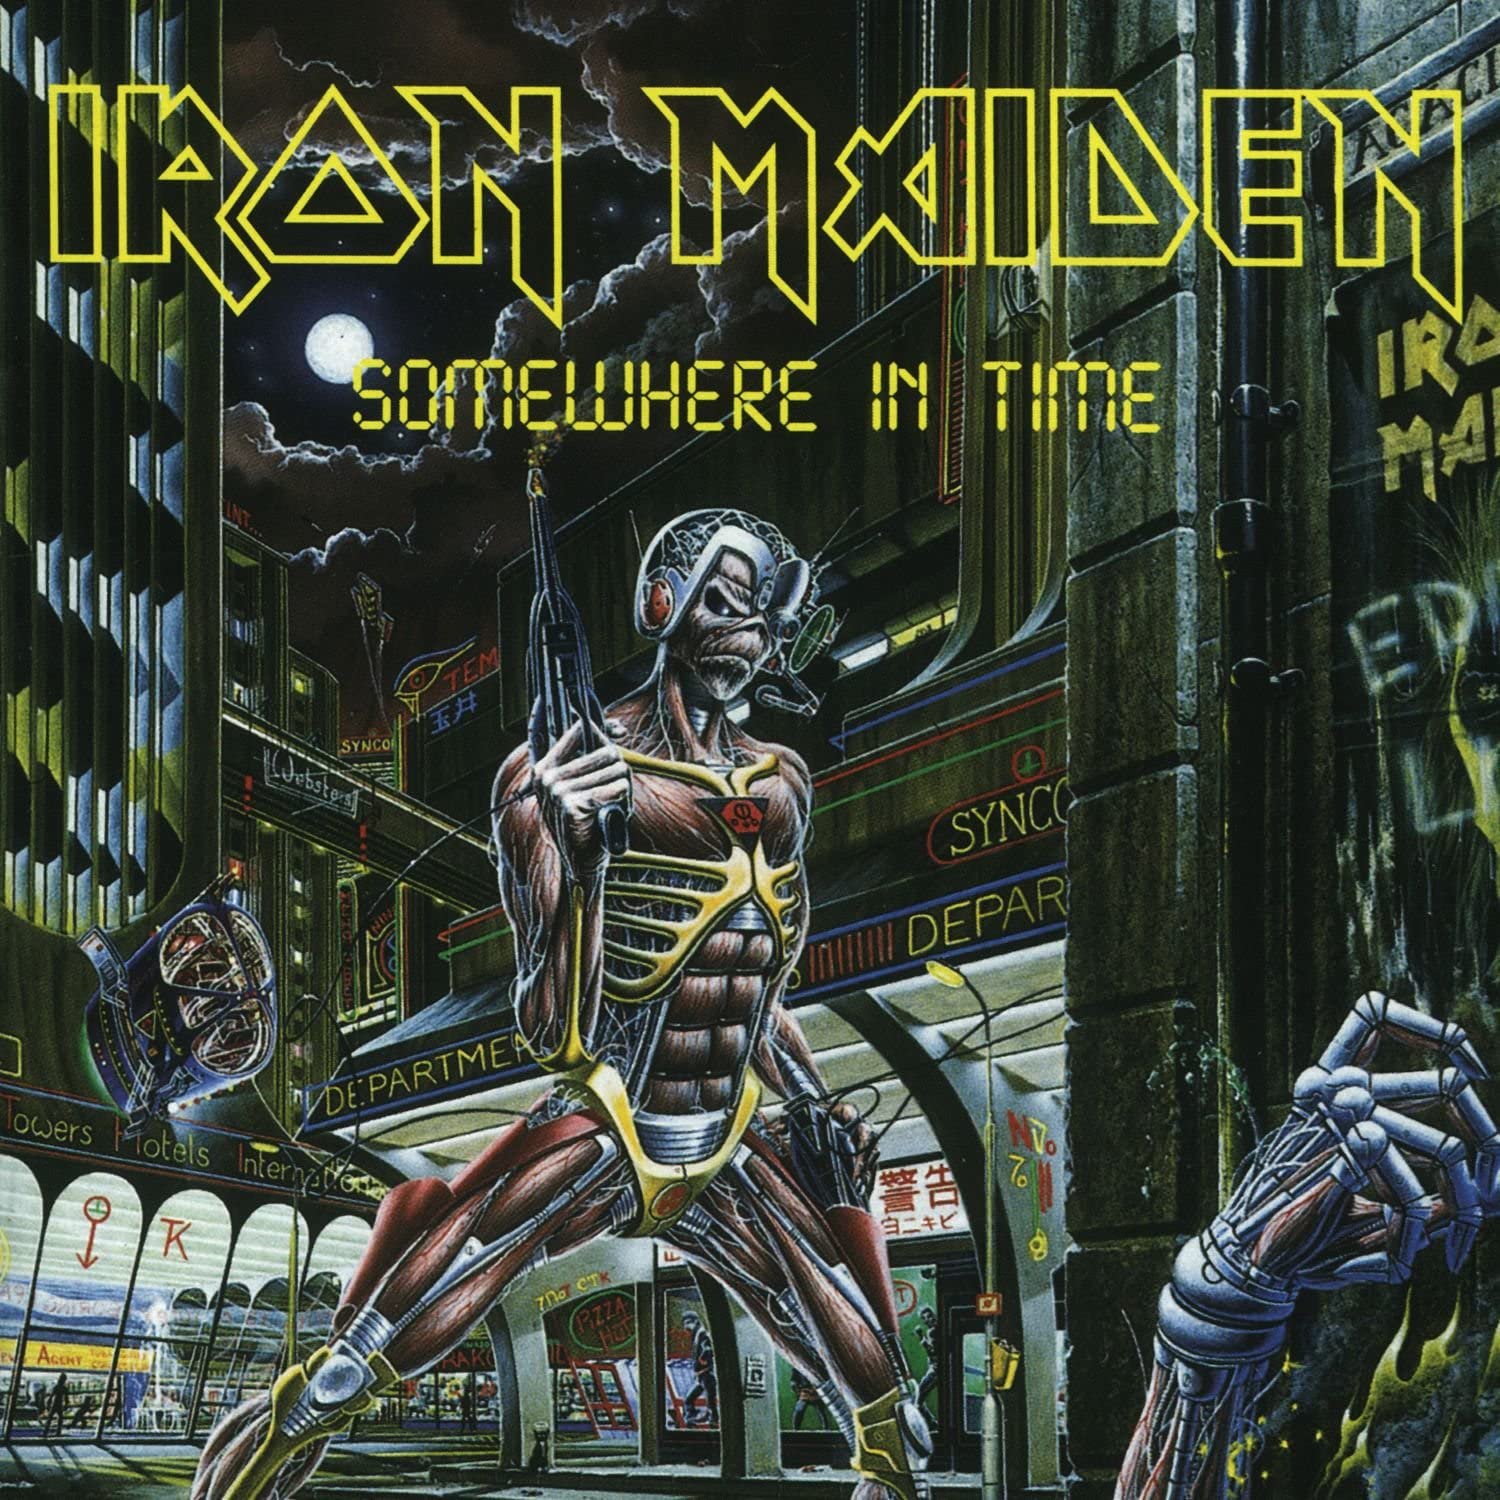 Somewhere in Time (Iron Maiden) - Sound & Vision